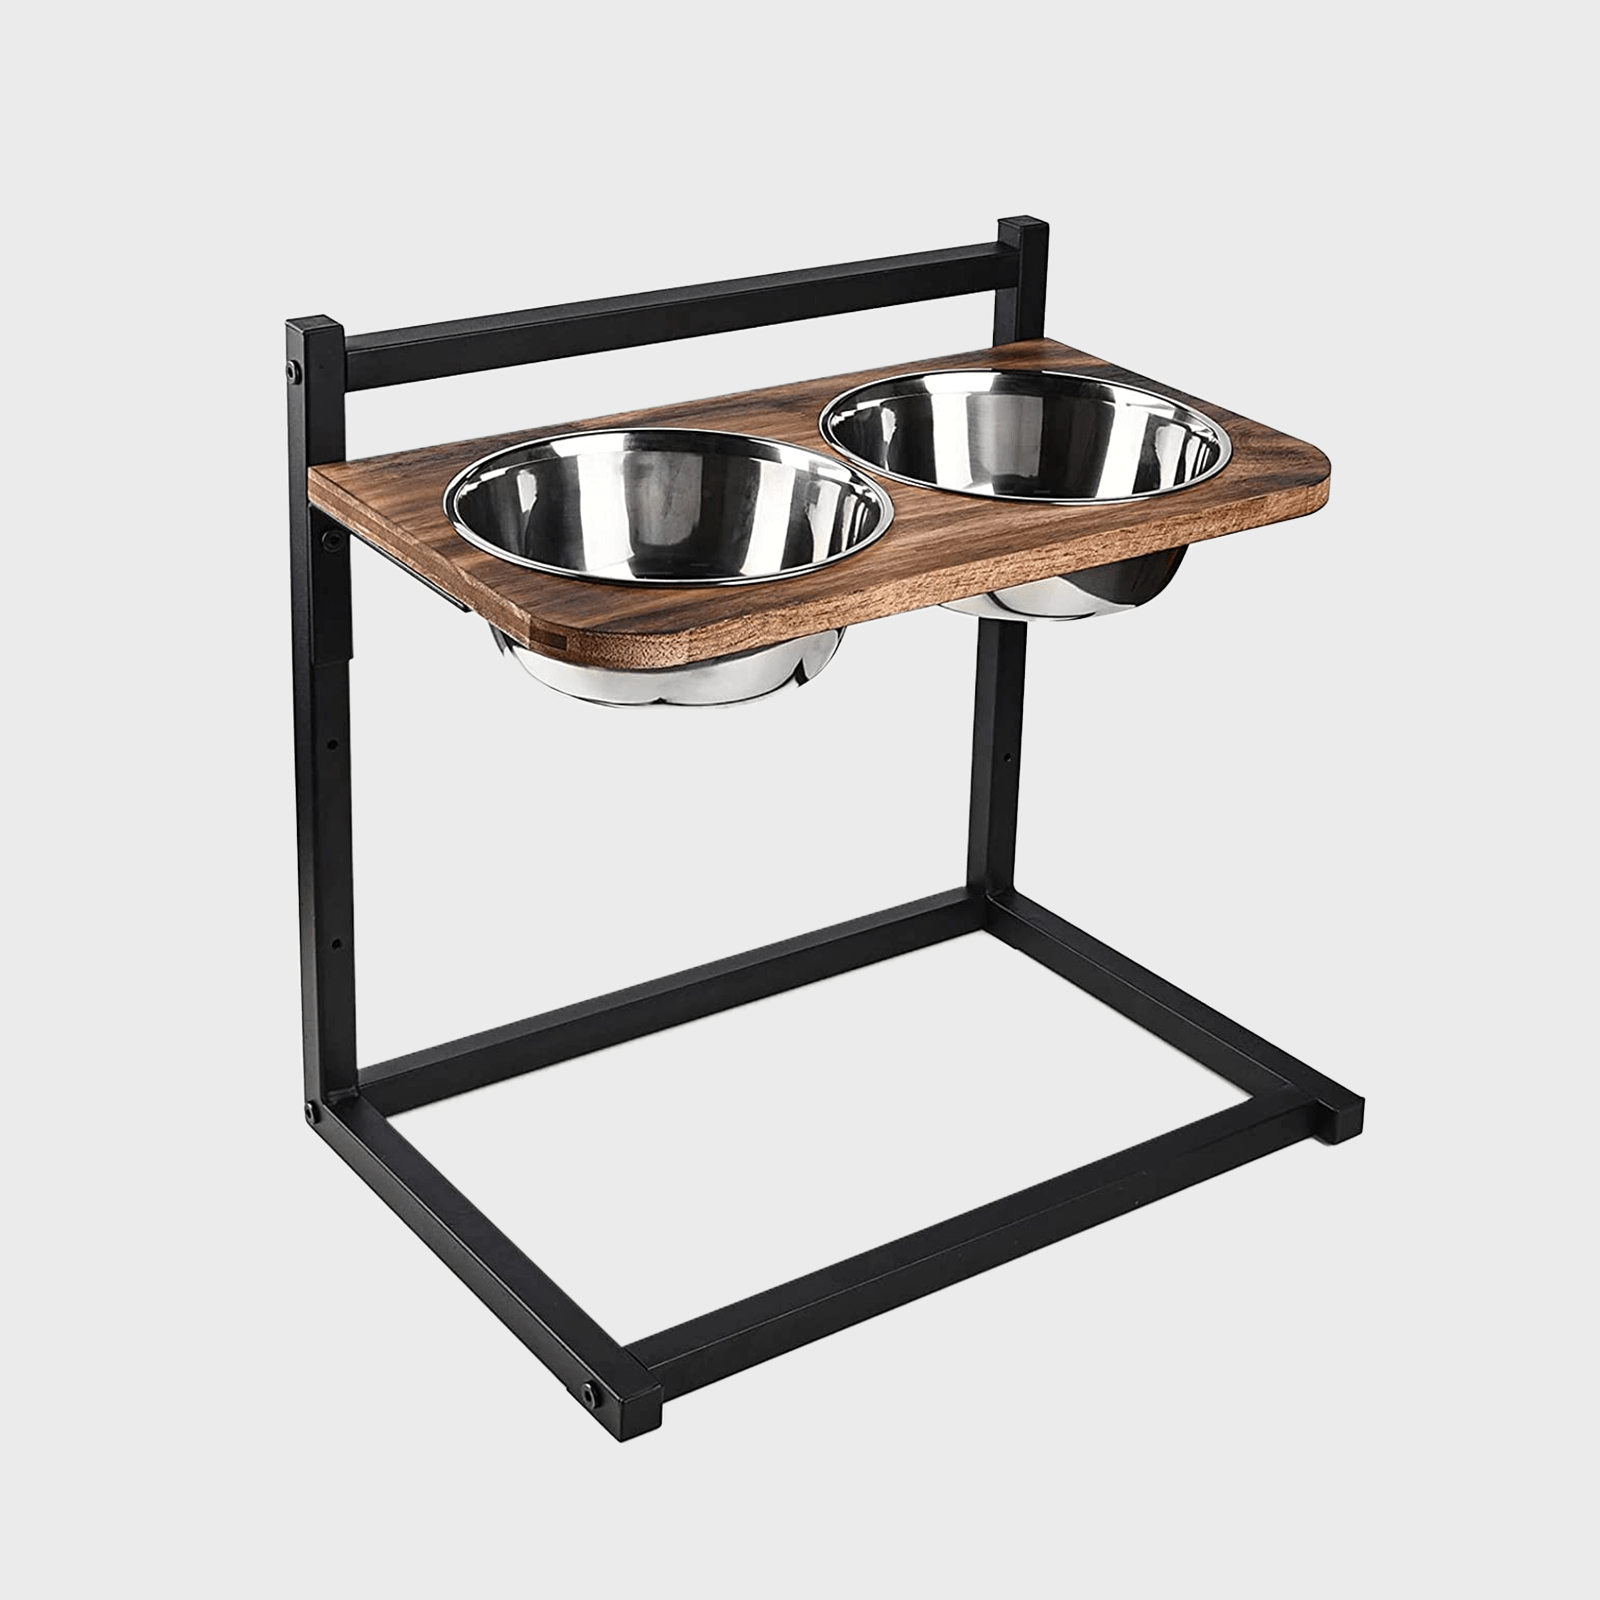 Elevated Dog Bowl with Double Stainless Steel Bowl and Waterproof Plate ,  Rustic Wooden Dog Dish Stand for Medium To Large Dogs and Cats. Do-Over